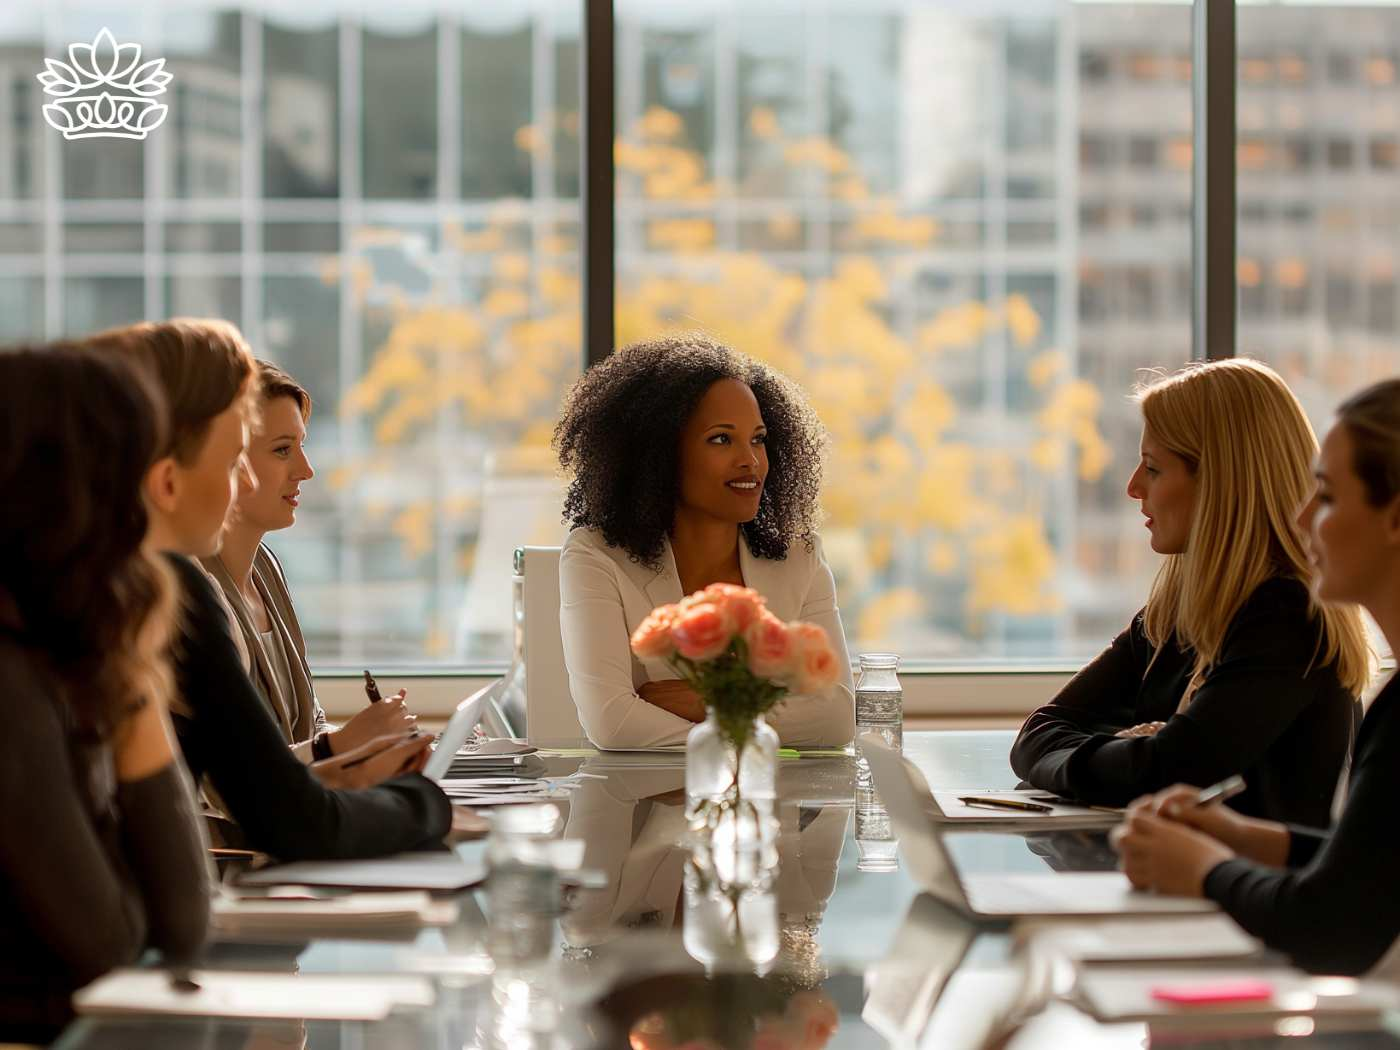 A group of focused businesswomen engaging in a productive boardroom discussion, with a delicate bouquet adding a touch of elegance from Fabulous Flowers and Gifts.